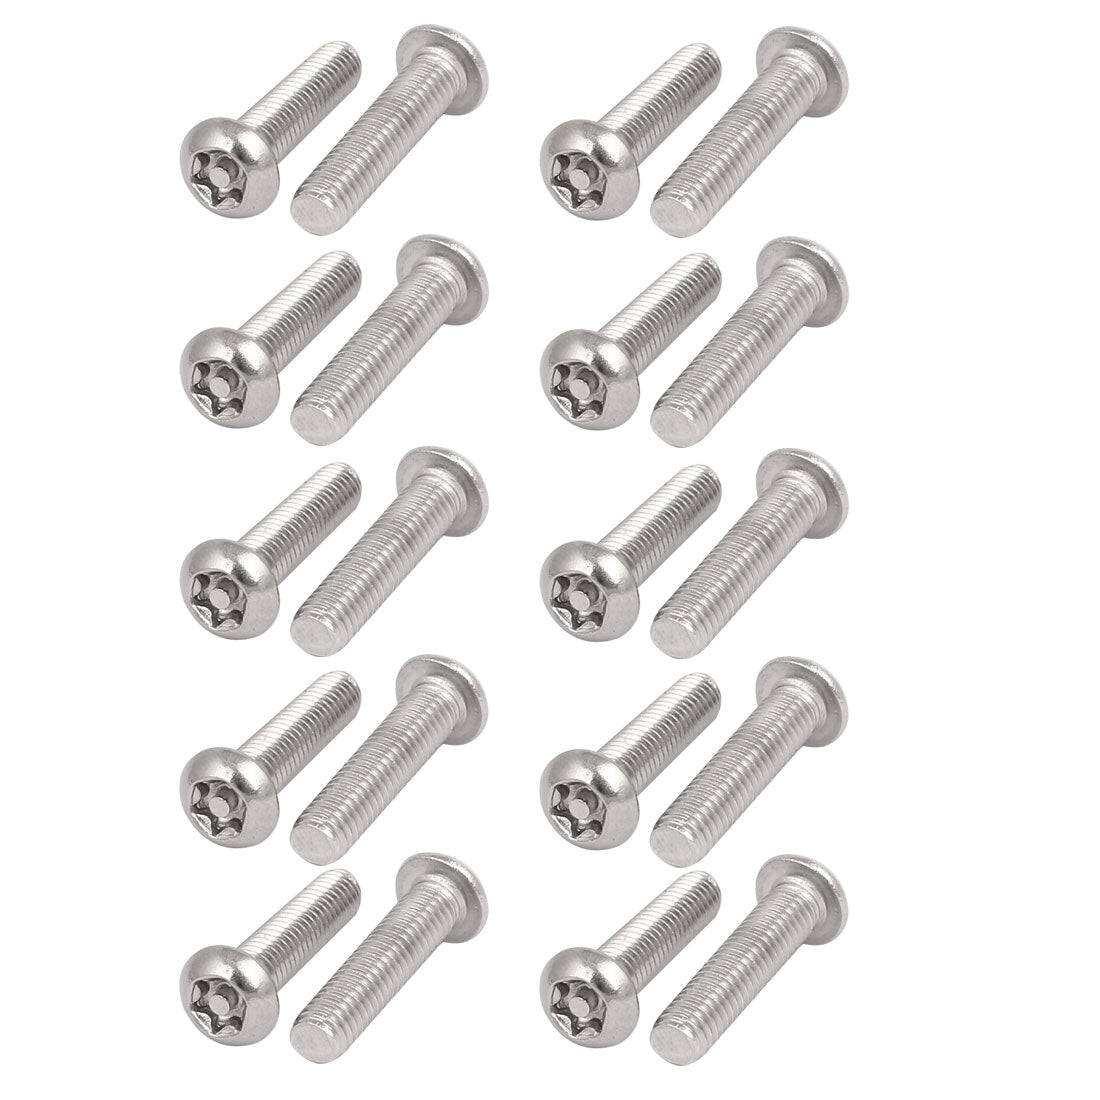 uxcell Uxcell M6x25mm 304 Stainless Steel Button Head Torx Security Tamper Proof Screws 20pcs